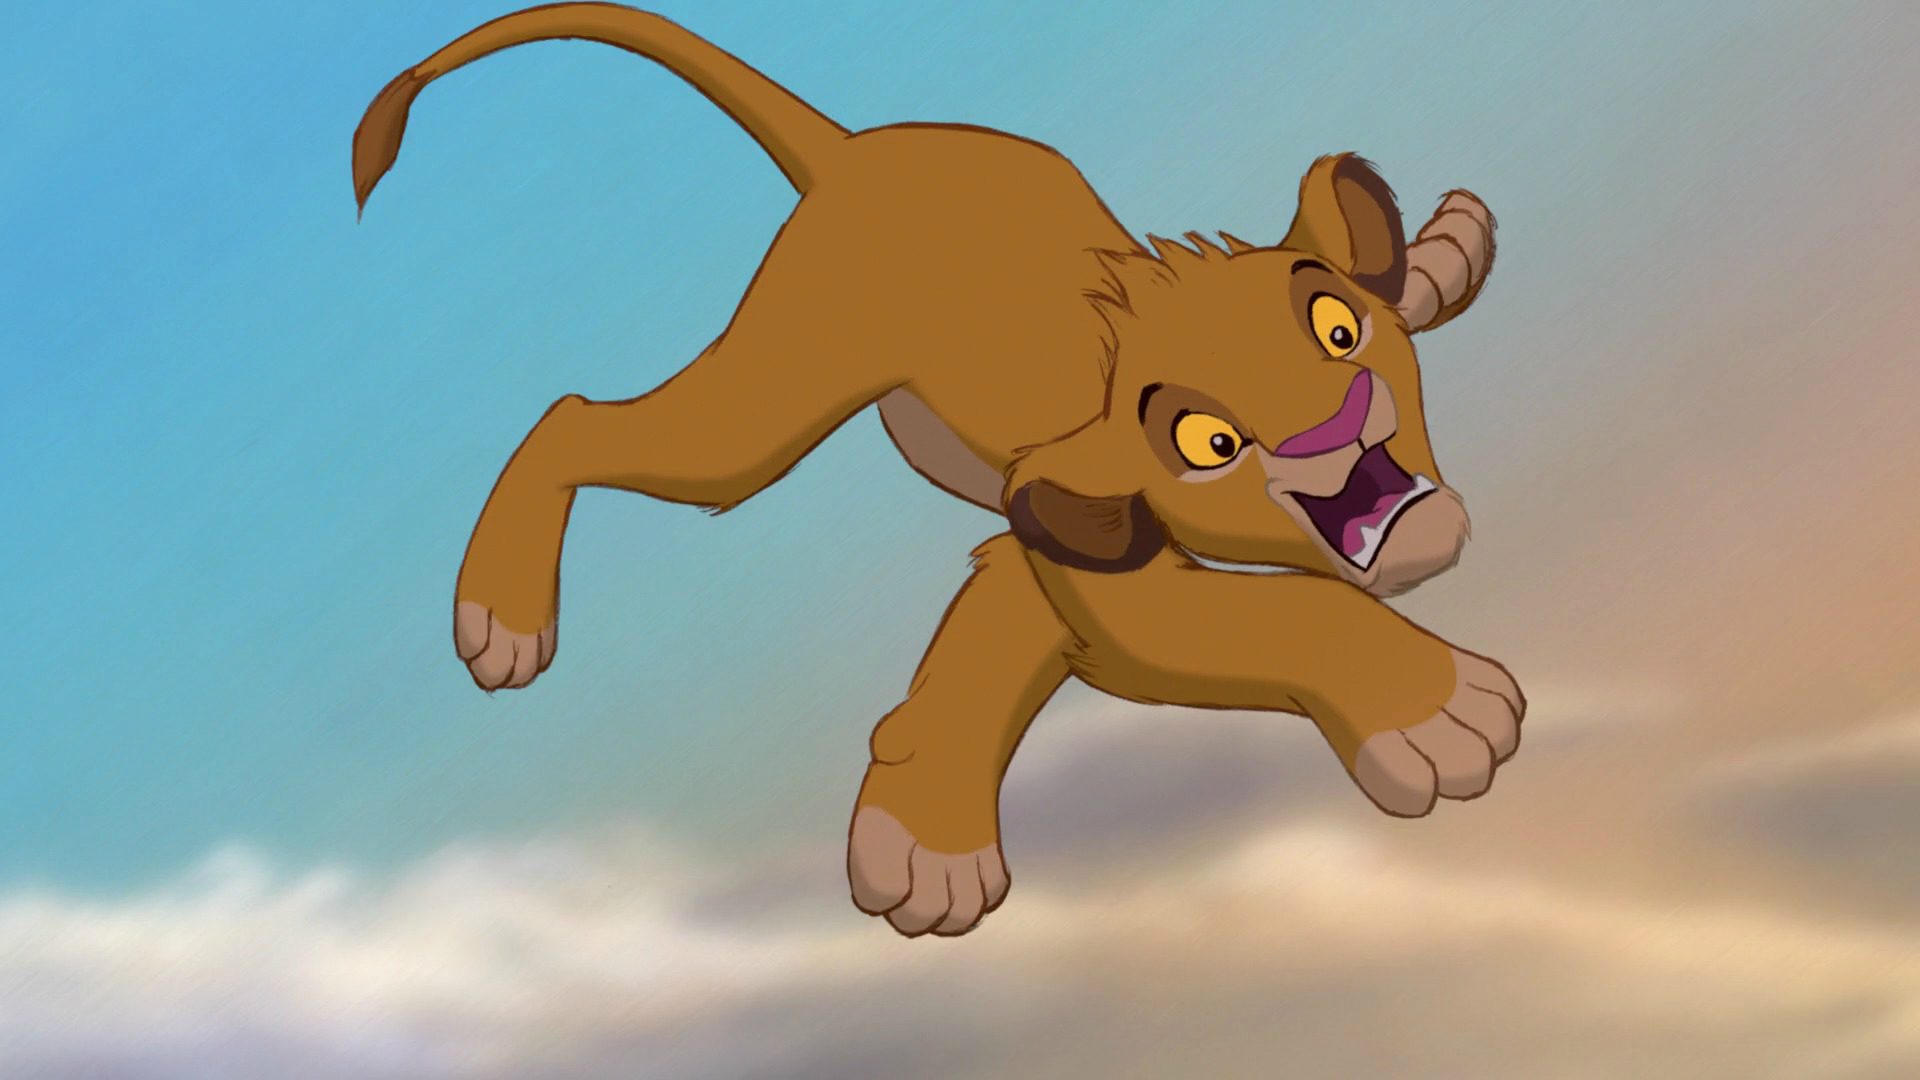 Why Simba from The Lion King is terrible